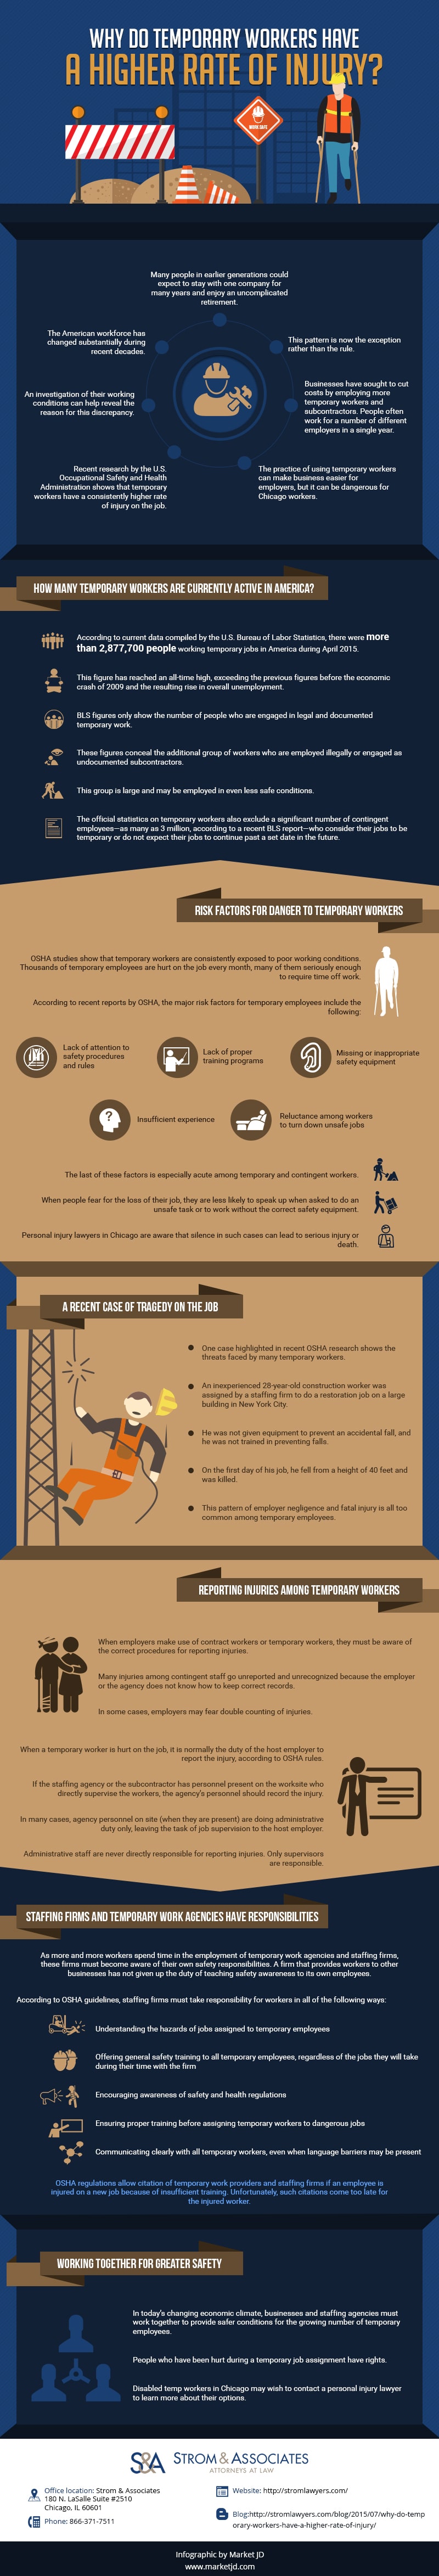 Temporary workers injury infographic